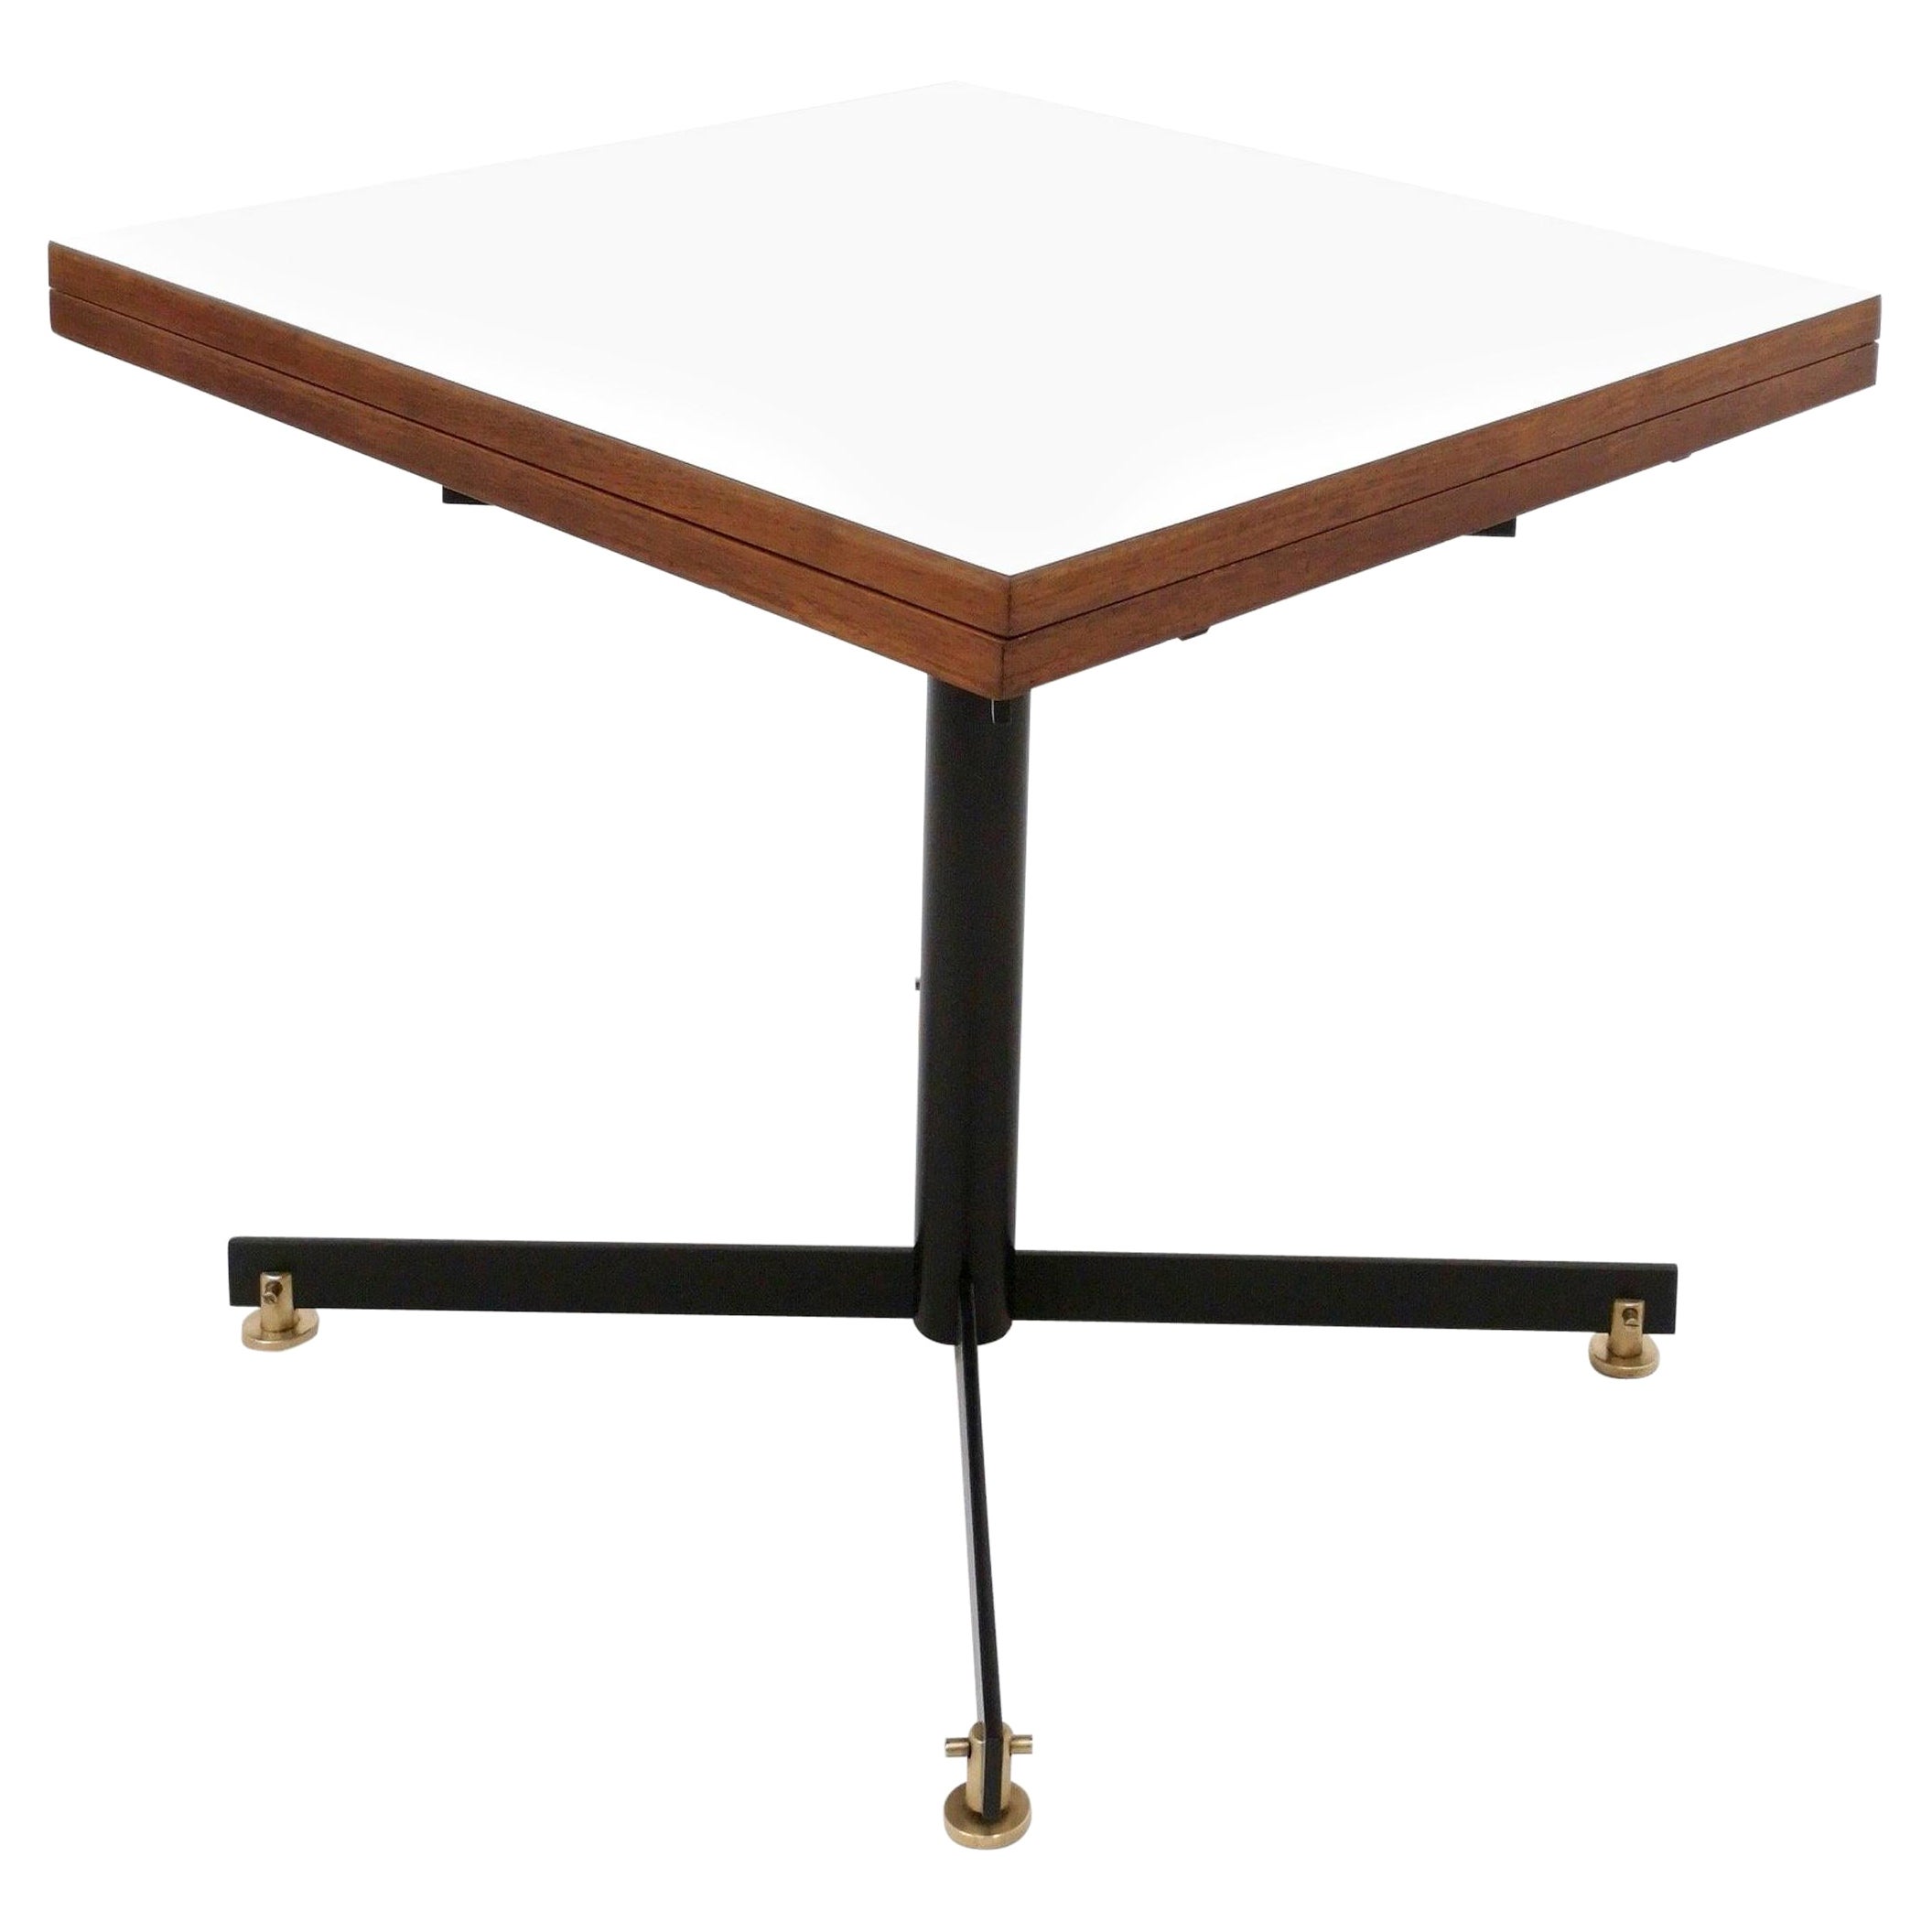 Made in Italy, 1950s.
This table is made in teak, black varnished metal and brass and its top is covered in white formica.
The opening mechanism works perfectly. 
It may show slight traces of use since it's vintage but it can be considered as in